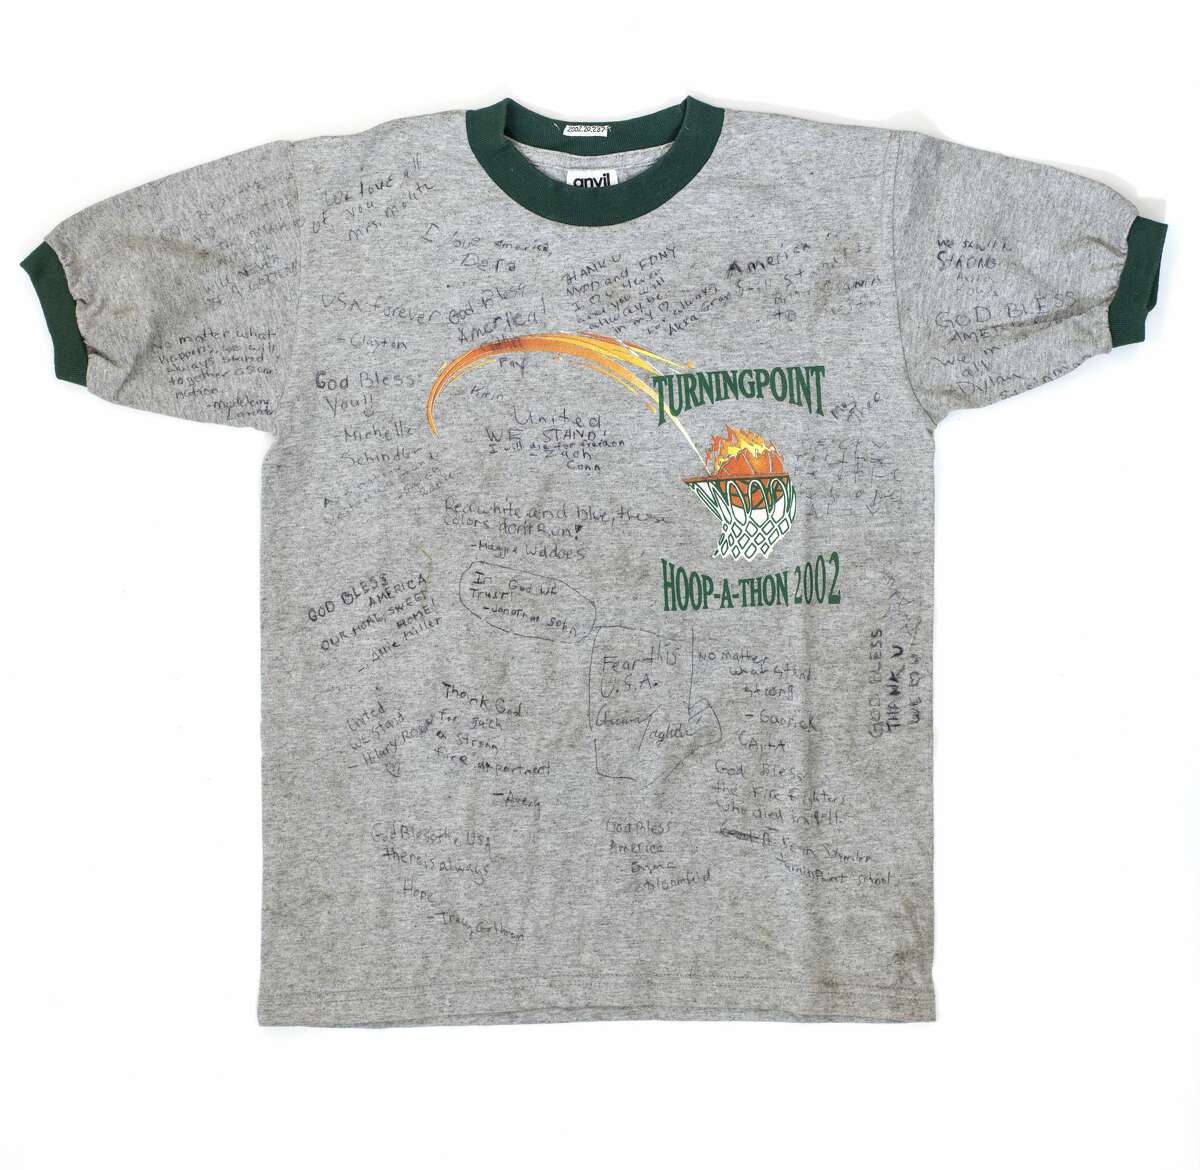 Keep clicking to see iconic T-shirts from the State Museum collection. "Turningpoint Hoop-a-thon, 2002." Collected following 9/11 from the memorial fence at Cedar and Broadway in Manhattan. The State Museum collected memorial materials from several locations in New York City, and many of those memorials include T-shirts, often signed.